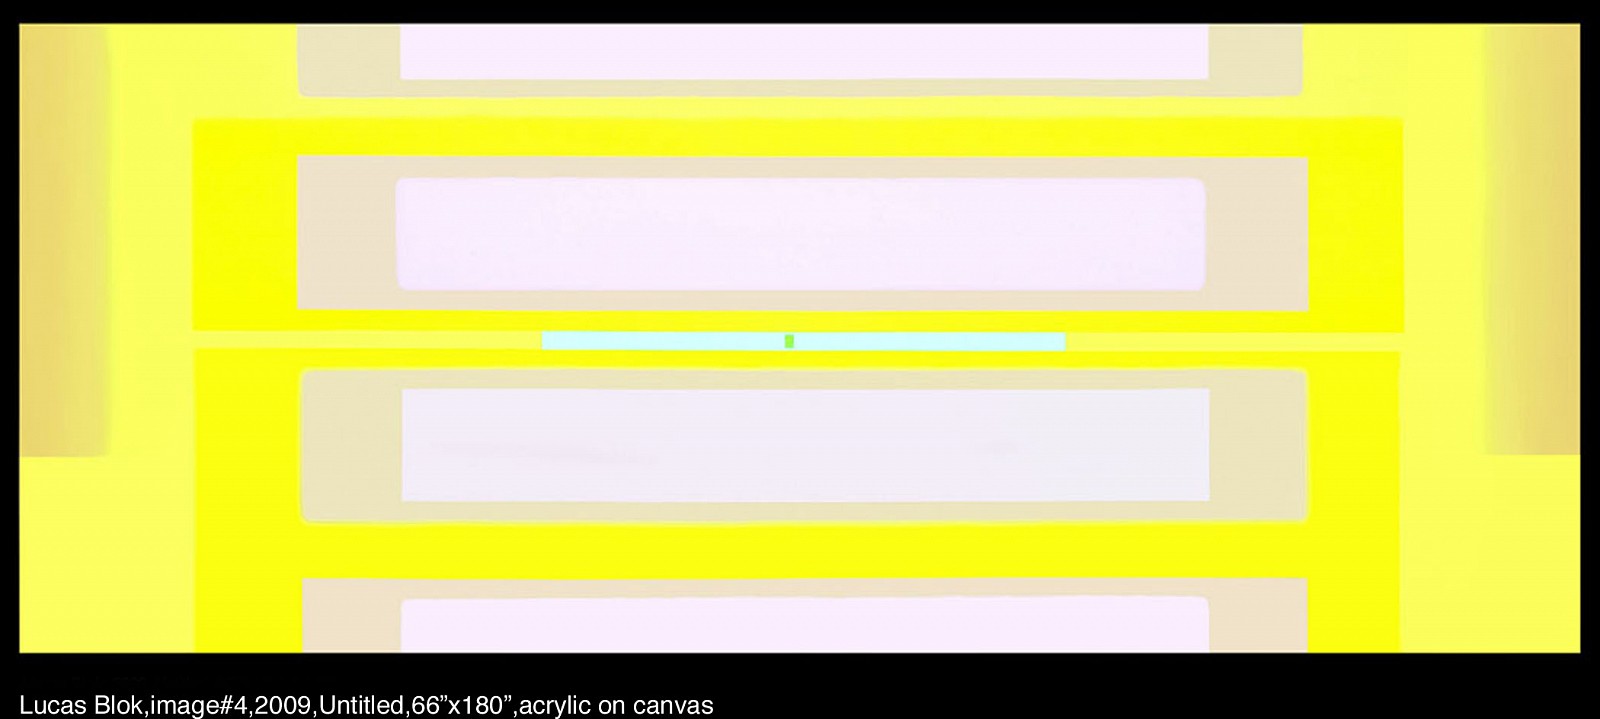 Lucas Blok
Untitled, 2009
acrylic on canvas, 66 x 180 in.